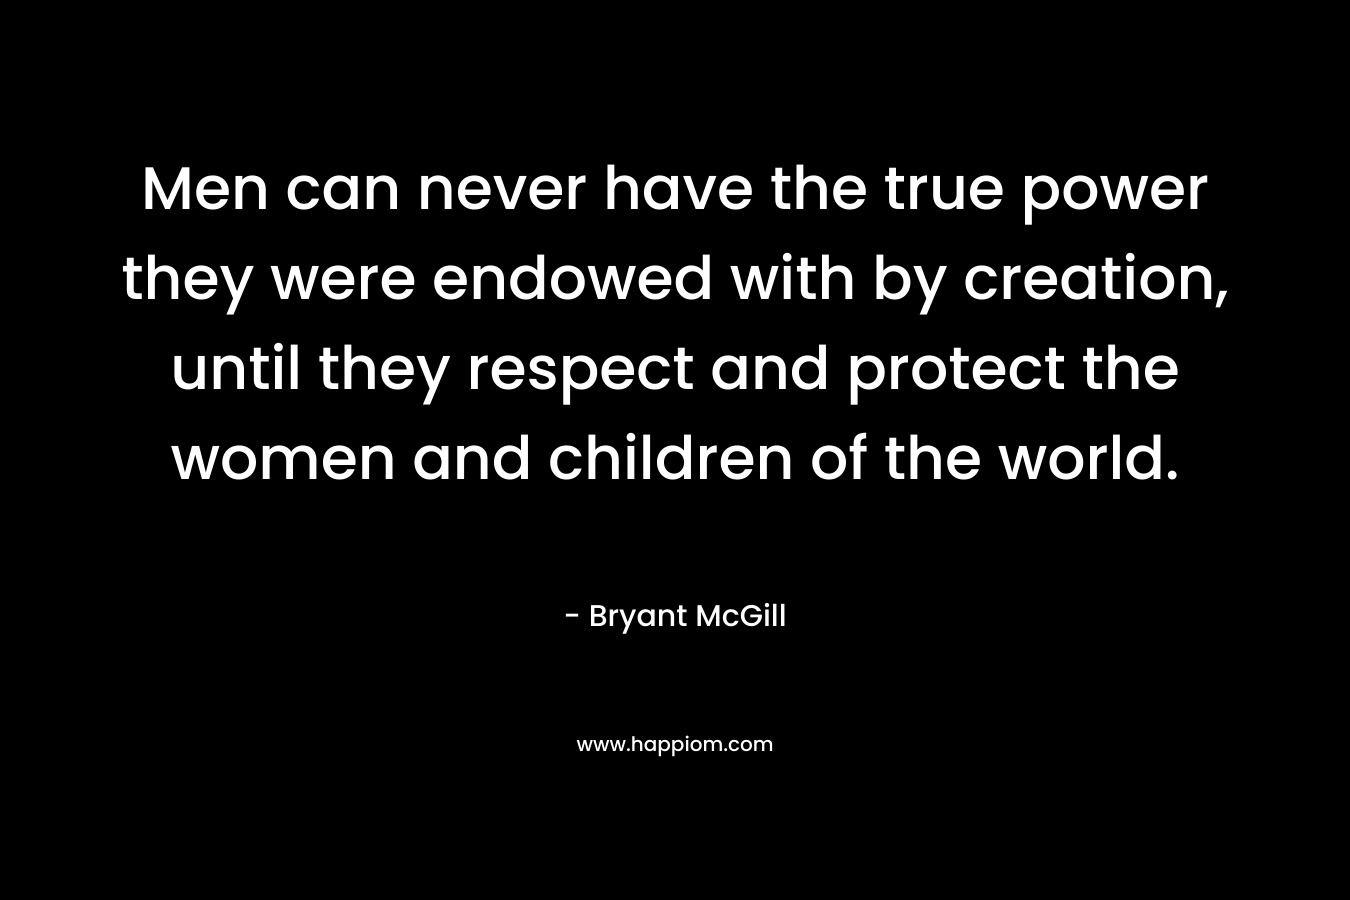 Men can never have the true power they were endowed with by creation, until they respect and protect the women and children of the world. – Bryant McGill